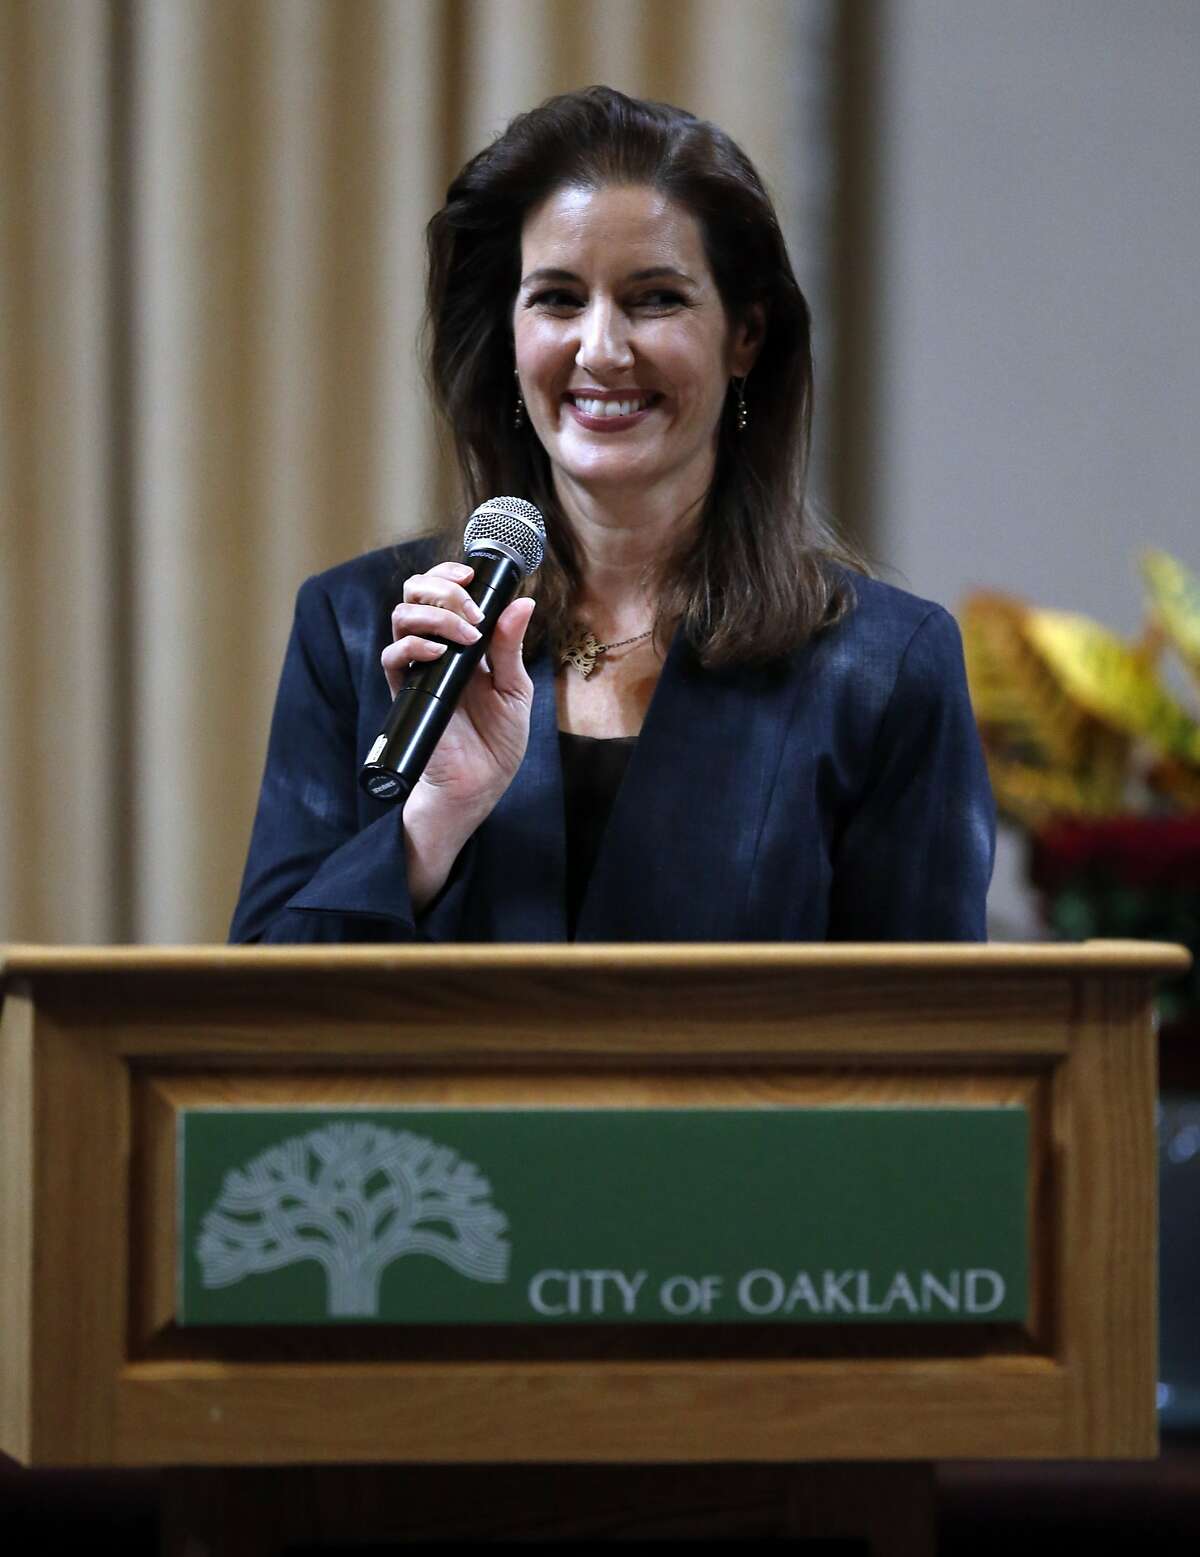 Oakland Mayor Libby Schaaf gives her "State of the City" address at City Hall in Oakland, Calif., on Wednesday, October 28, 2015.